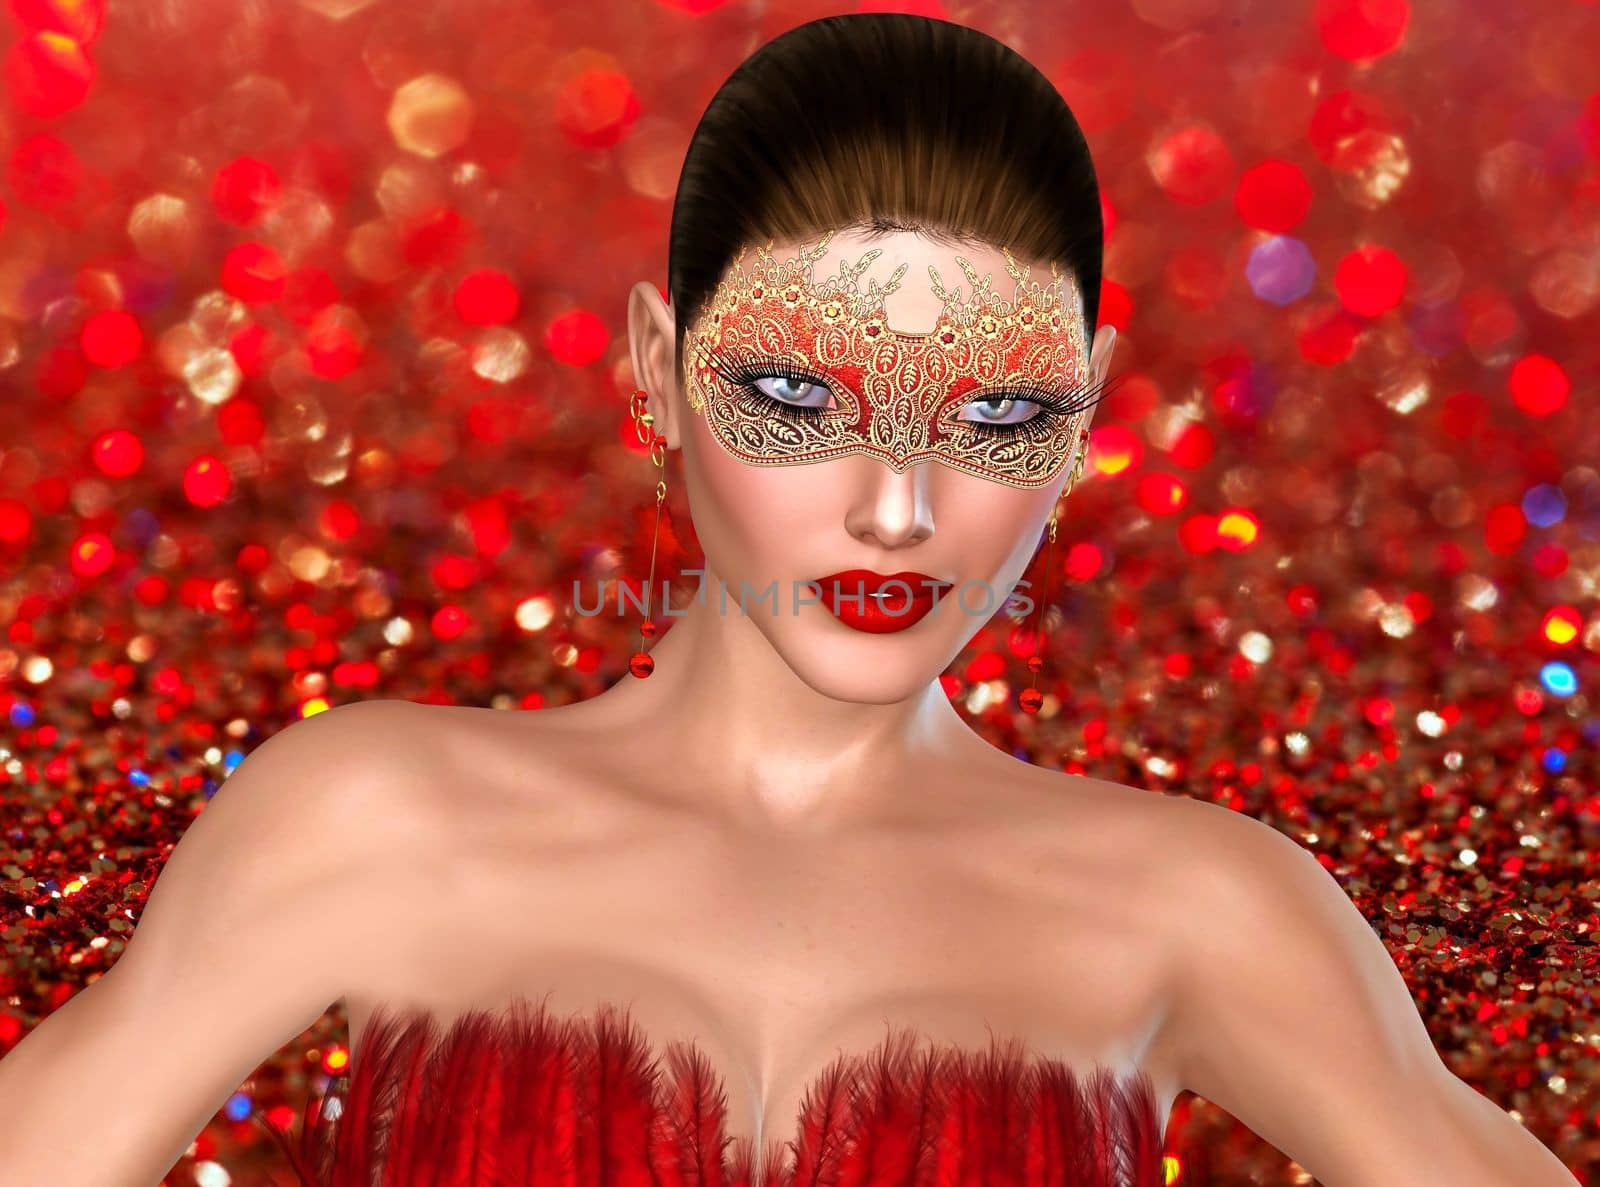 A masquerade mask enhances the mystery of a woman on a bokeh background of red glitter and sparkles.